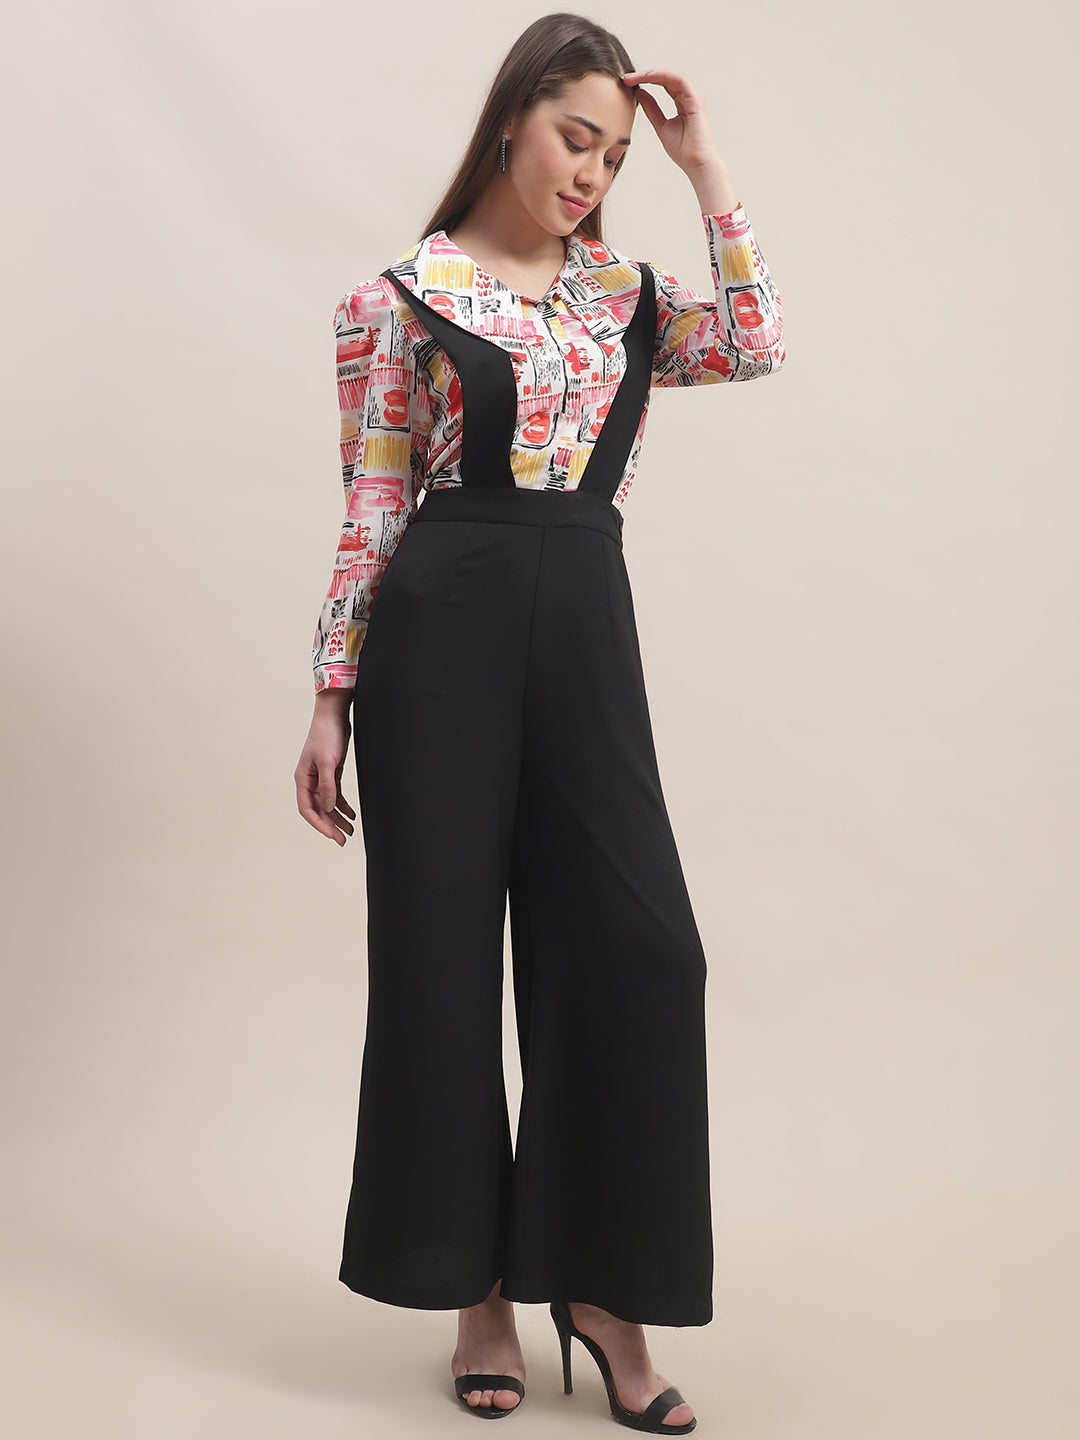 Blanc9 Multicoloured Printed Shirt With Pant Co-Ord Set